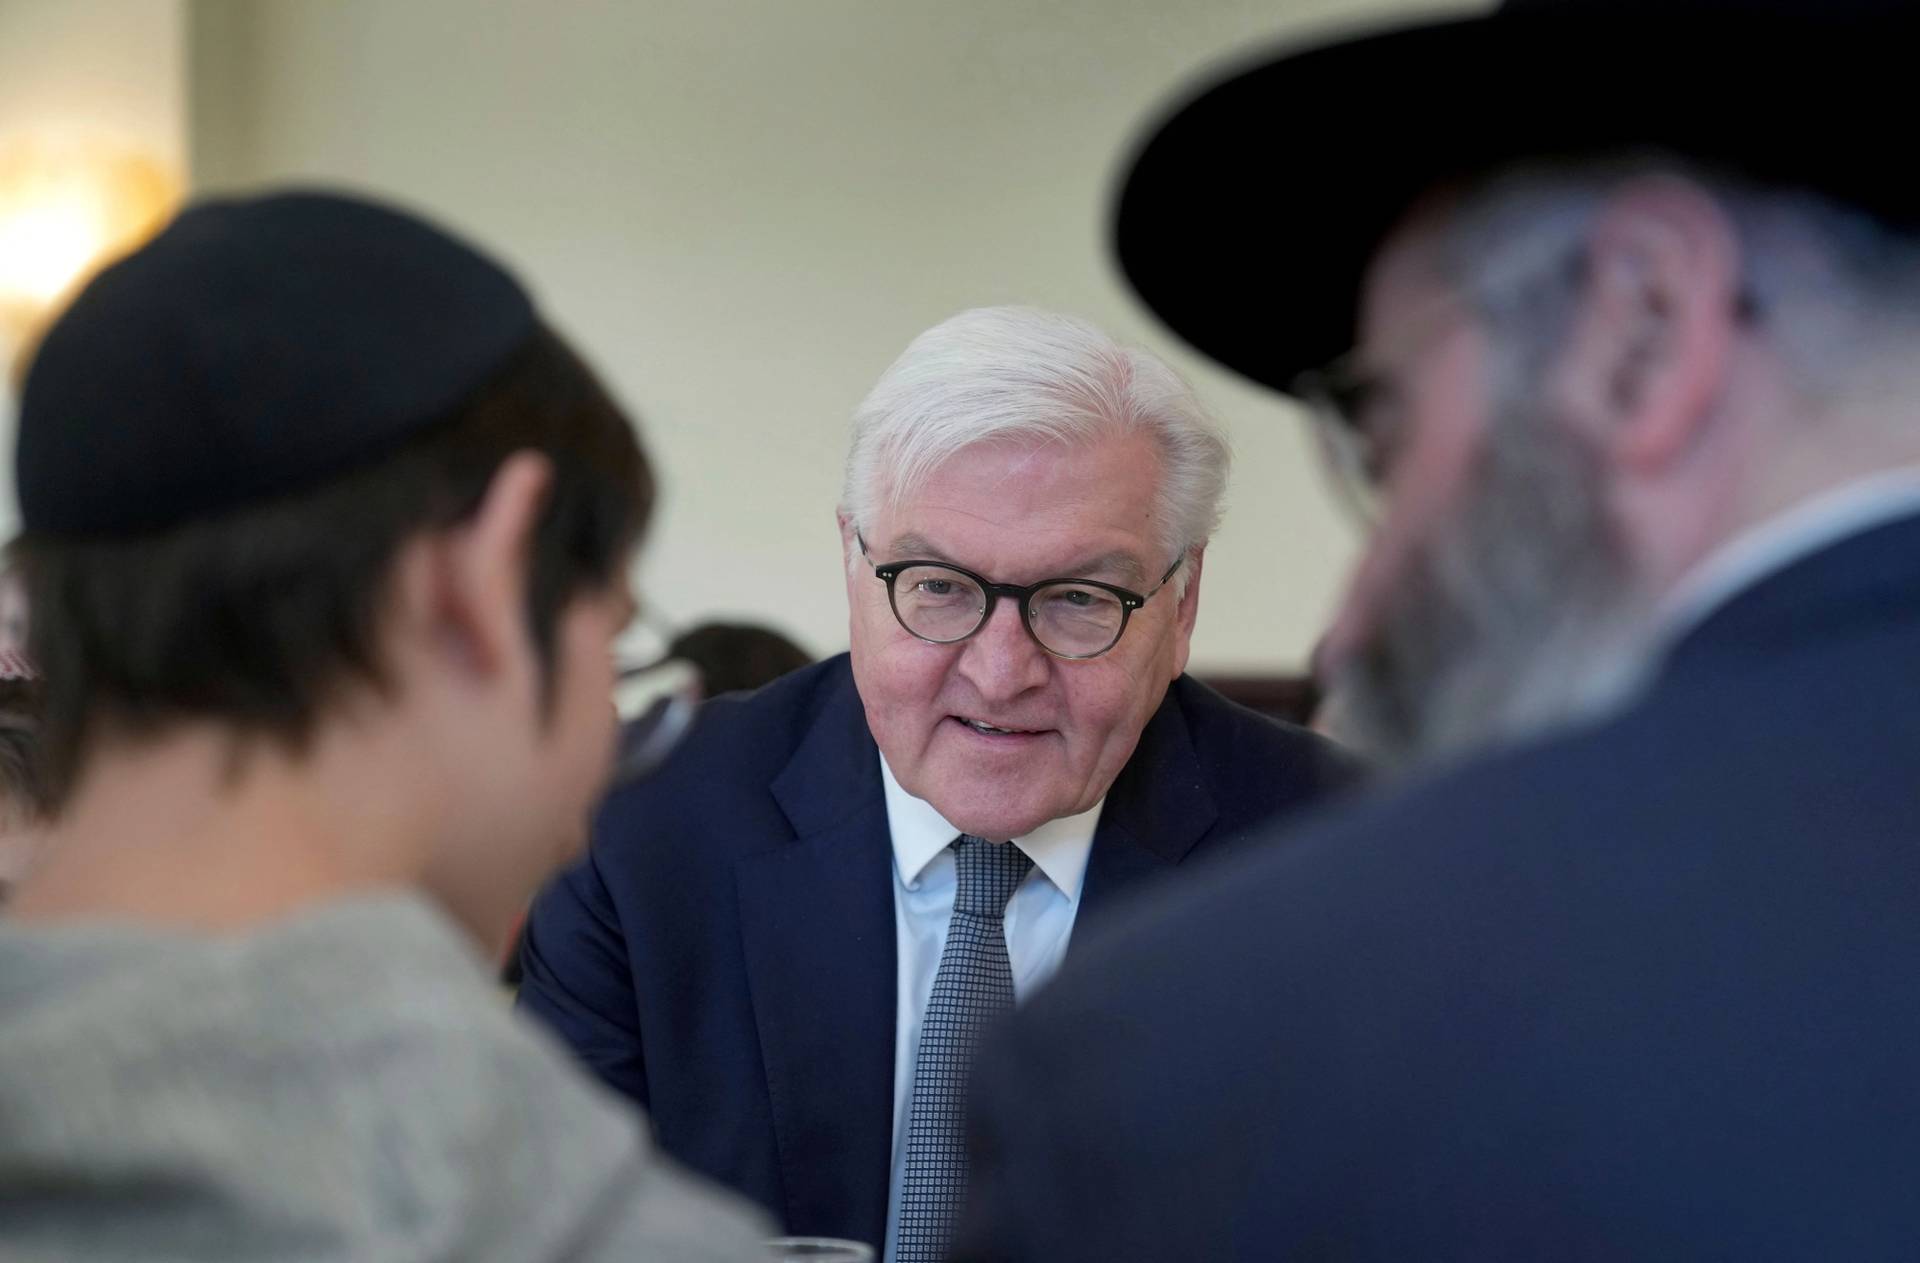 German President Frank-Walter Steinmeier talks with refugees from Odessa at the Szloma-Albam-House, the Jewish community center in Berlin, on March 7, 2022